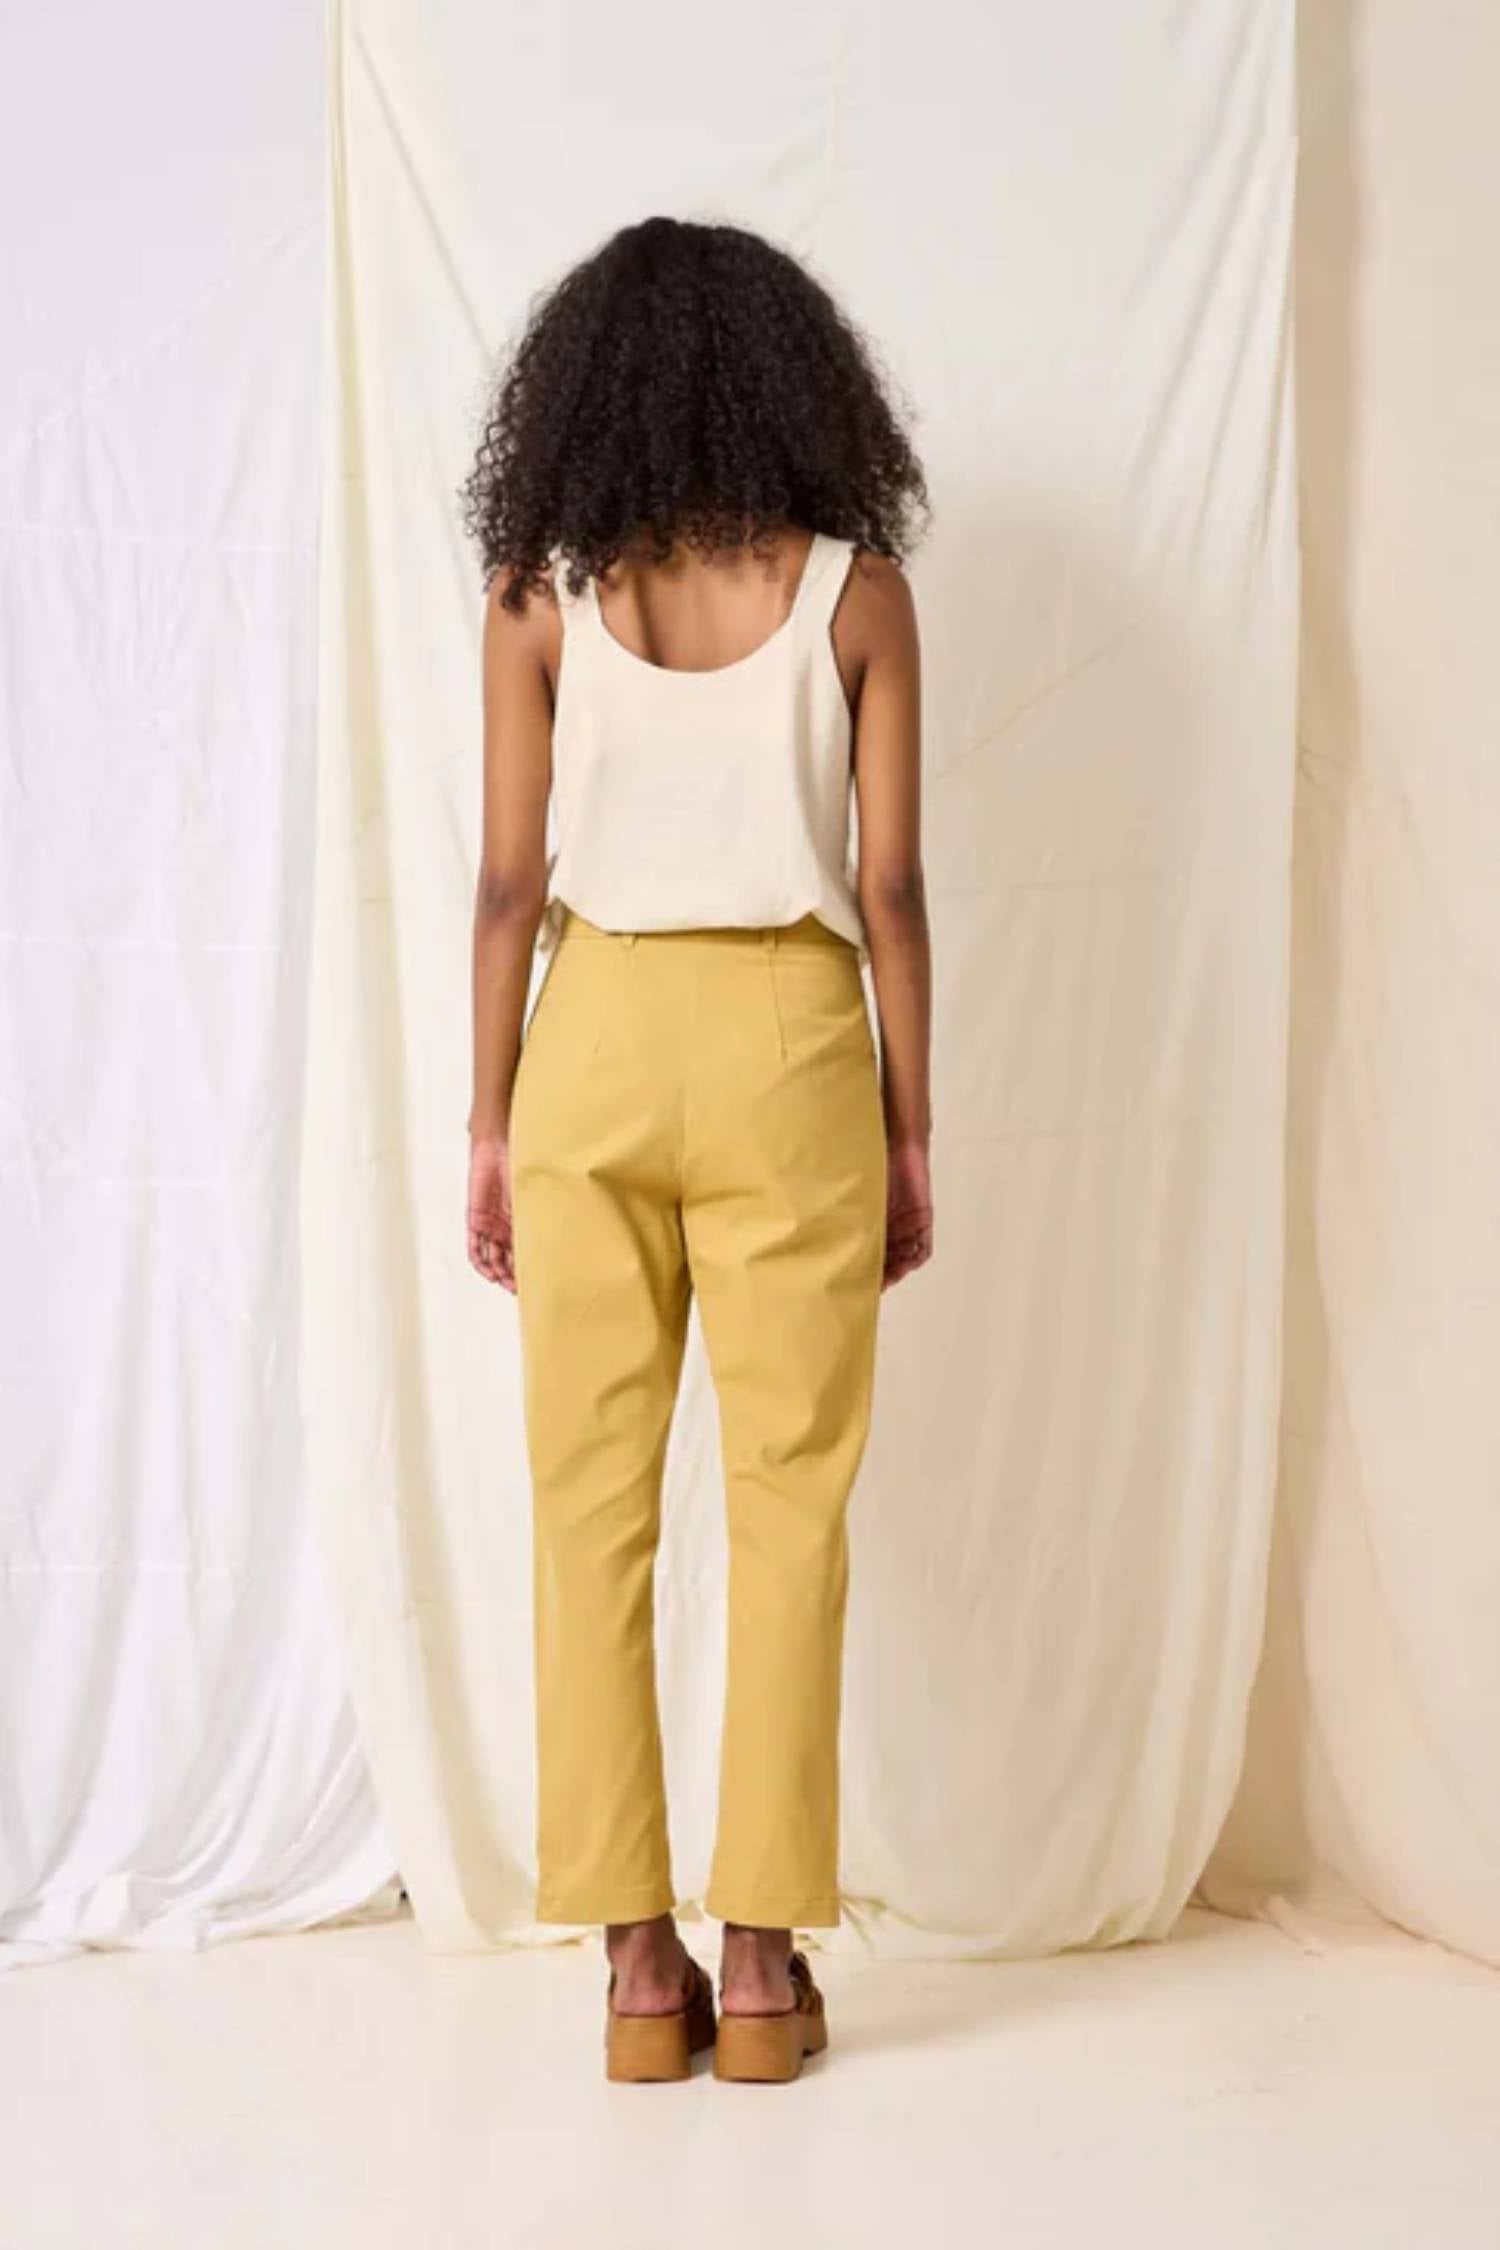 Liseron Pants by Cokluch, Honey, back view, straight cut, zip fly, rounded patch pockets on the front, darts at the back, slightly cropped, 100% cotton, sizes XS to L, made in Montreal